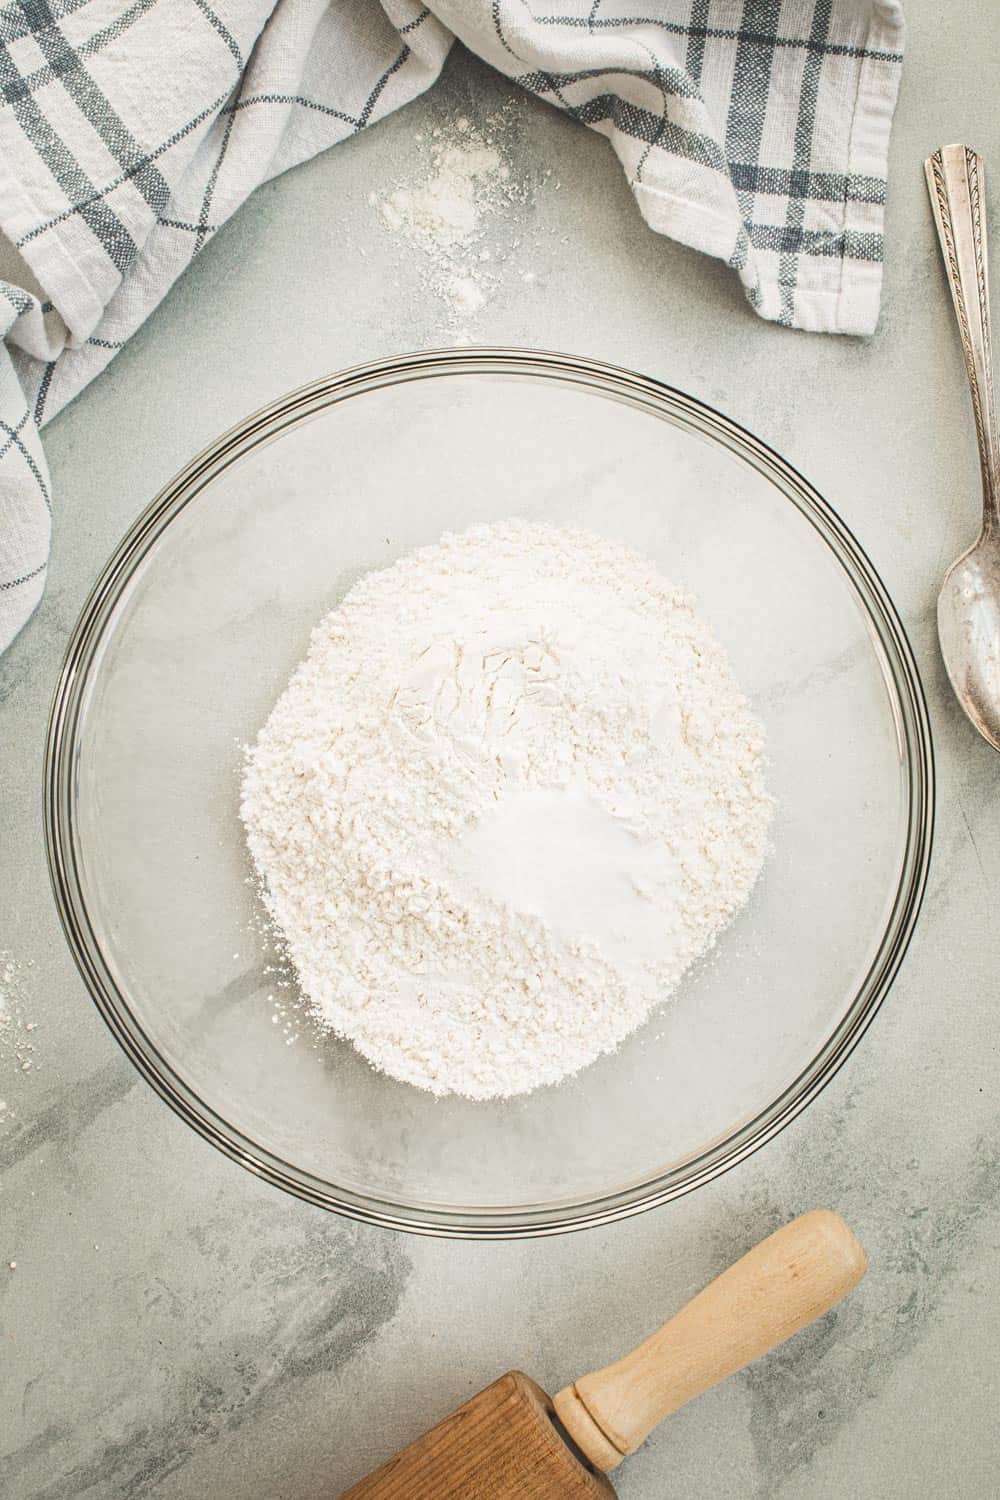 Dry ingredients for pie crust in a glass bowl.